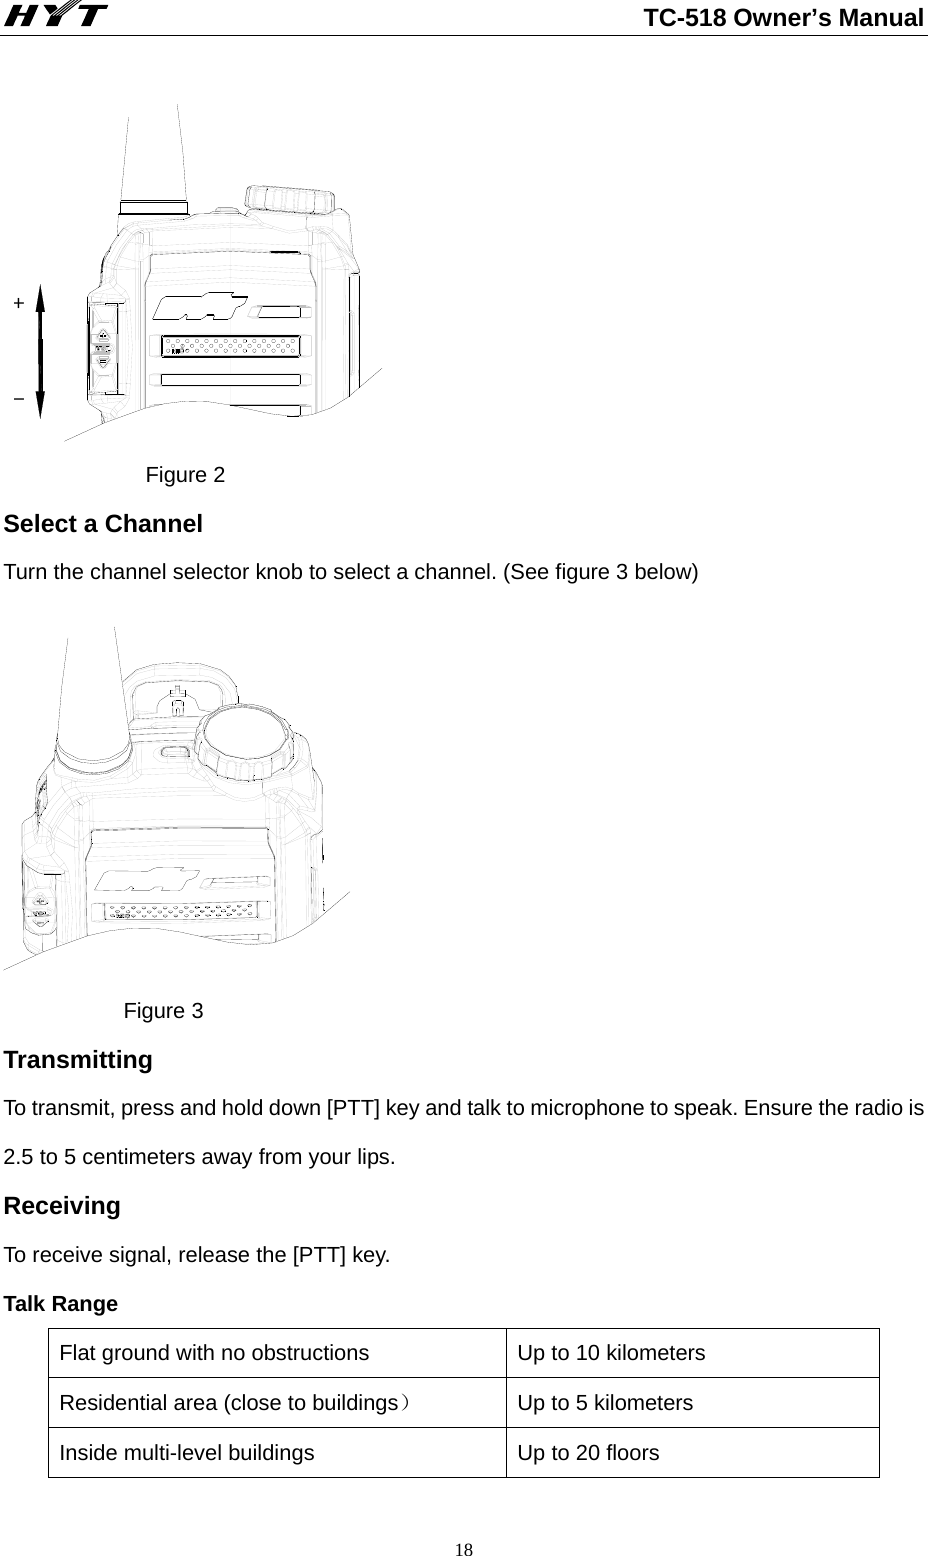                                                          TC-518 Owner’s Manual  18 -+              Figure 2 Select a Channel     Turn the channel selector knob to select a channel. (See figure 3 below)               Figure 3 Transmitting To transmit, press and hold down [PTT] key and talk to microphone to speak. Ensure the radio is 2.5 to 5 centimeters away from your lips.   Receiving To receive signal, release the [PTT] key.     Talk Range Flat ground with no obstructions  Up to 10 kilometers   Residential area (close to buildings） Up to 5 kilometers   Inside multi-level buildings  Up to 20 floors 